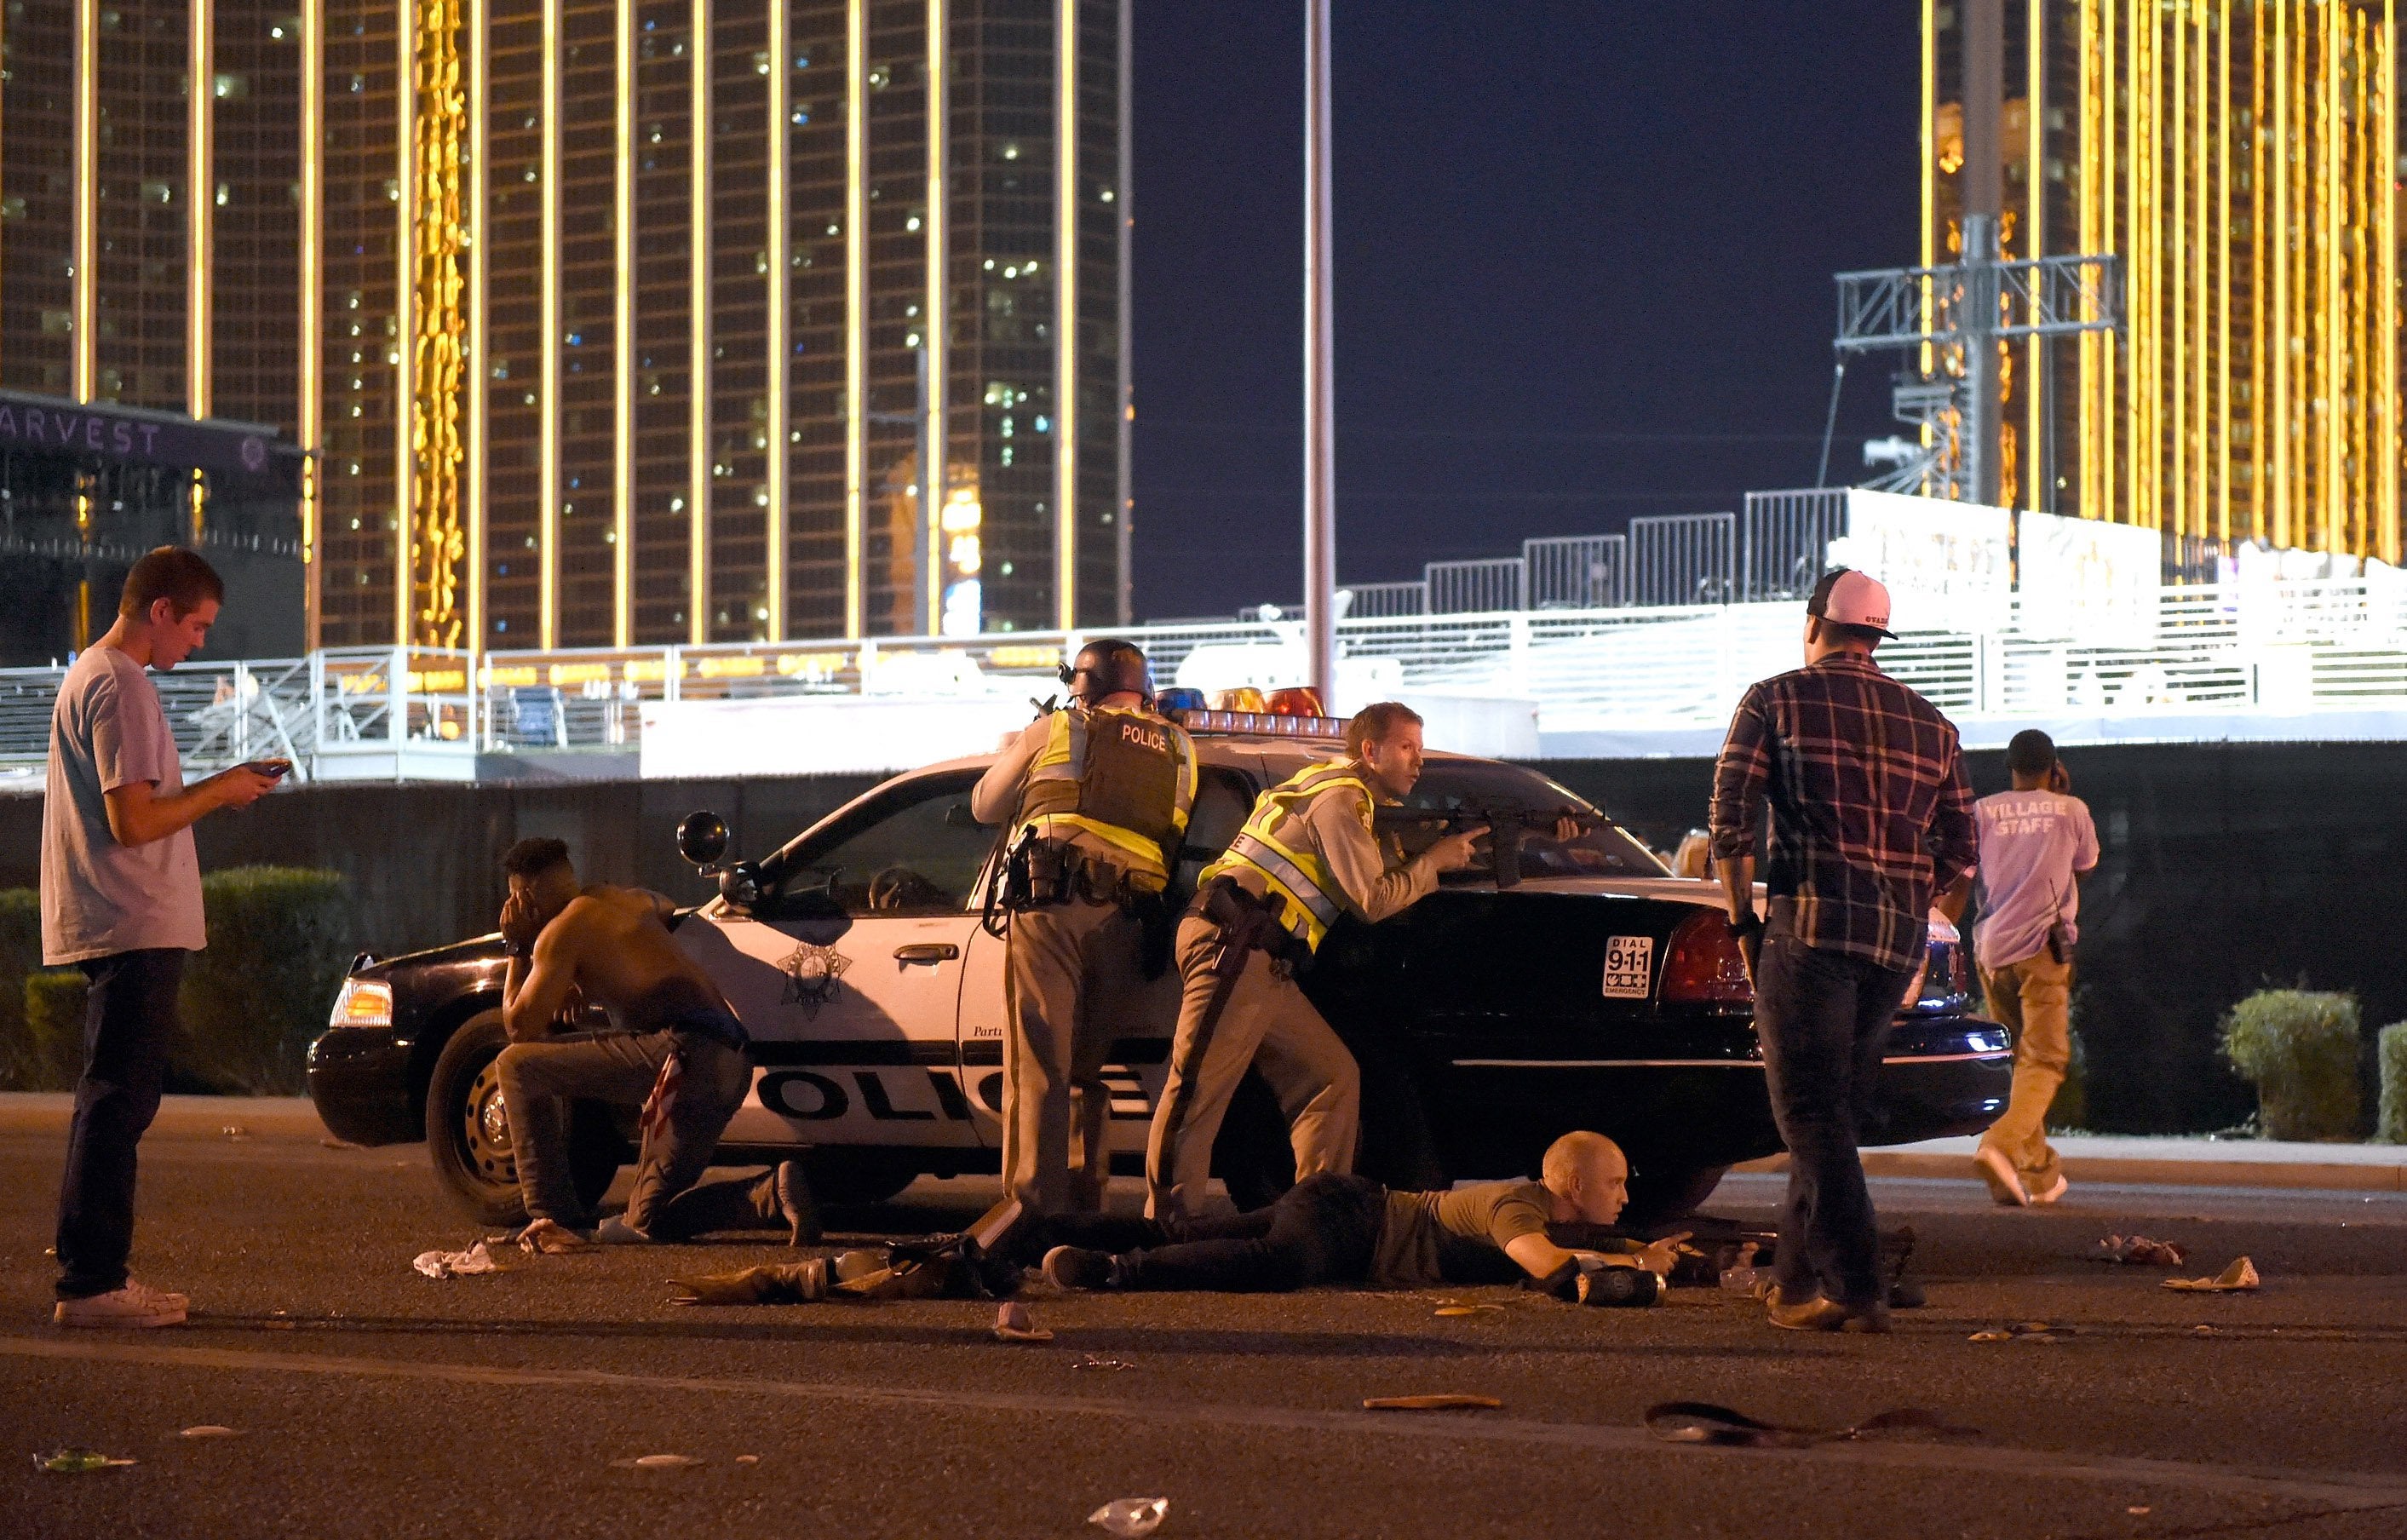 At Least 50 Dead And 200 Injured In Mass Shooting At Concert In Las Vegas